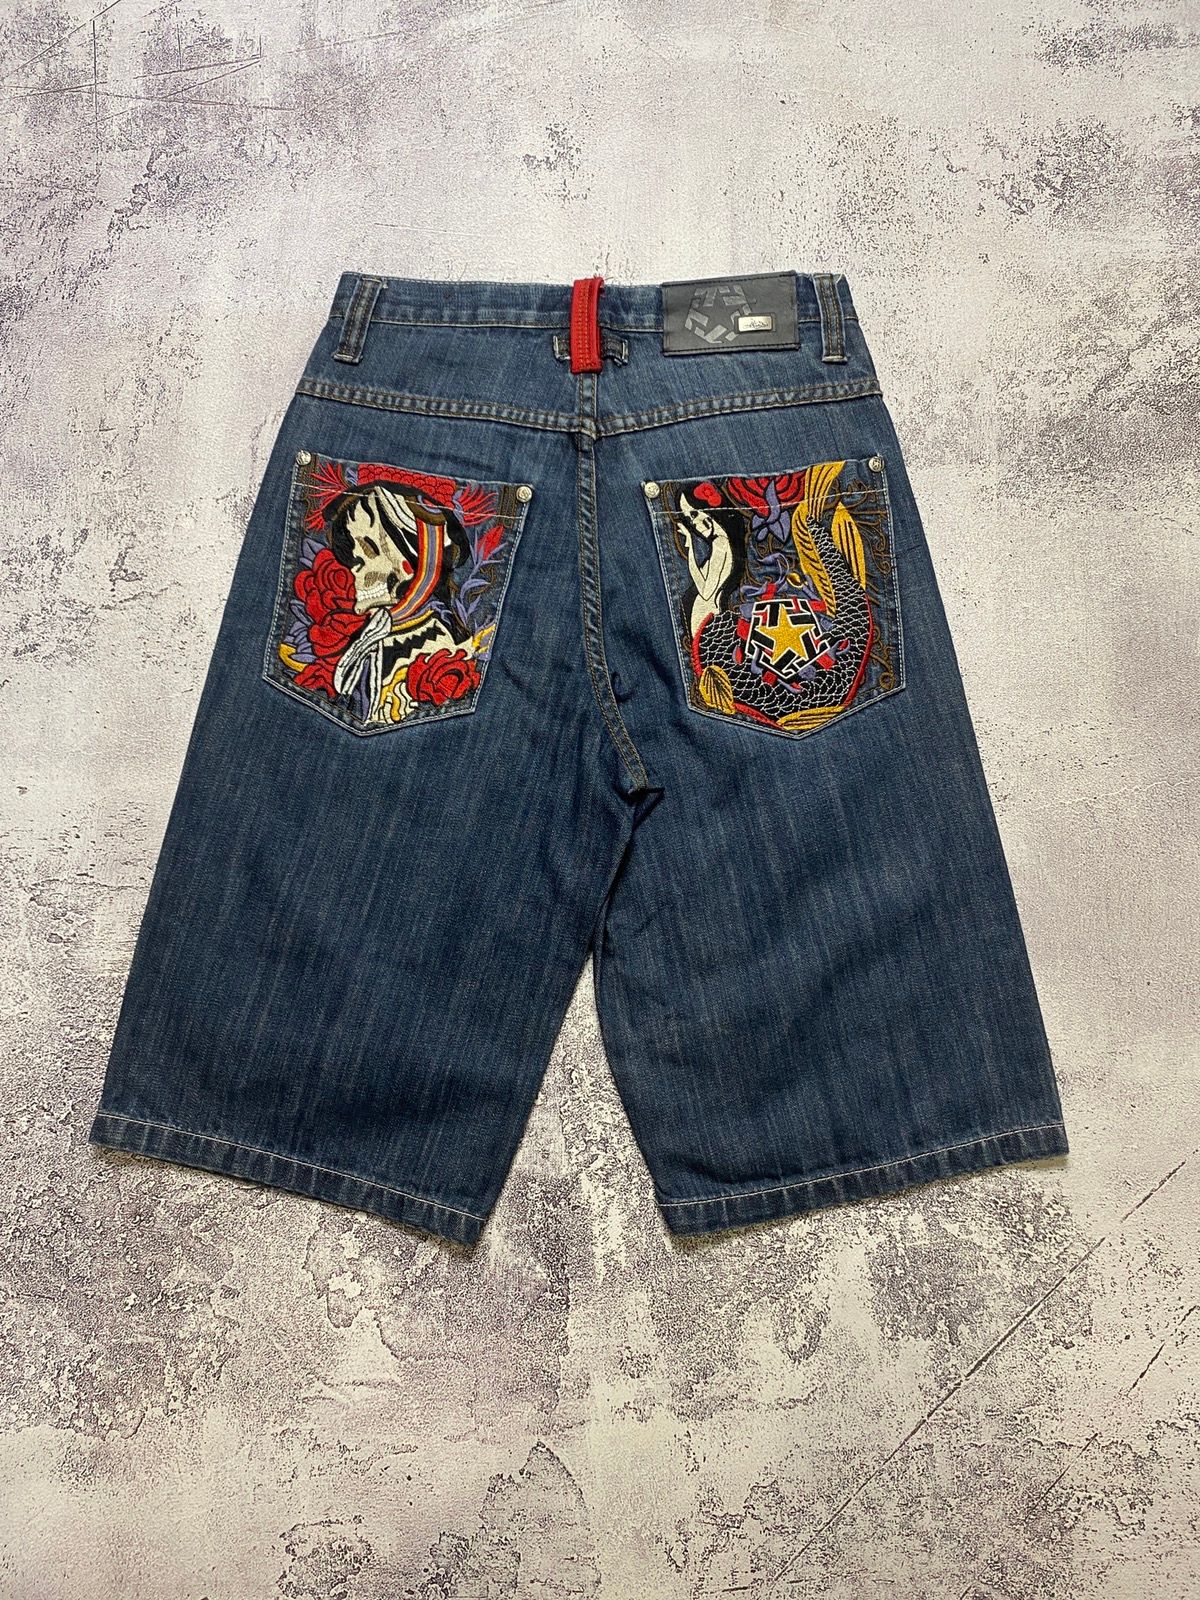 Vintage Vintage JNCO Style Baggy Shorts | Grailed